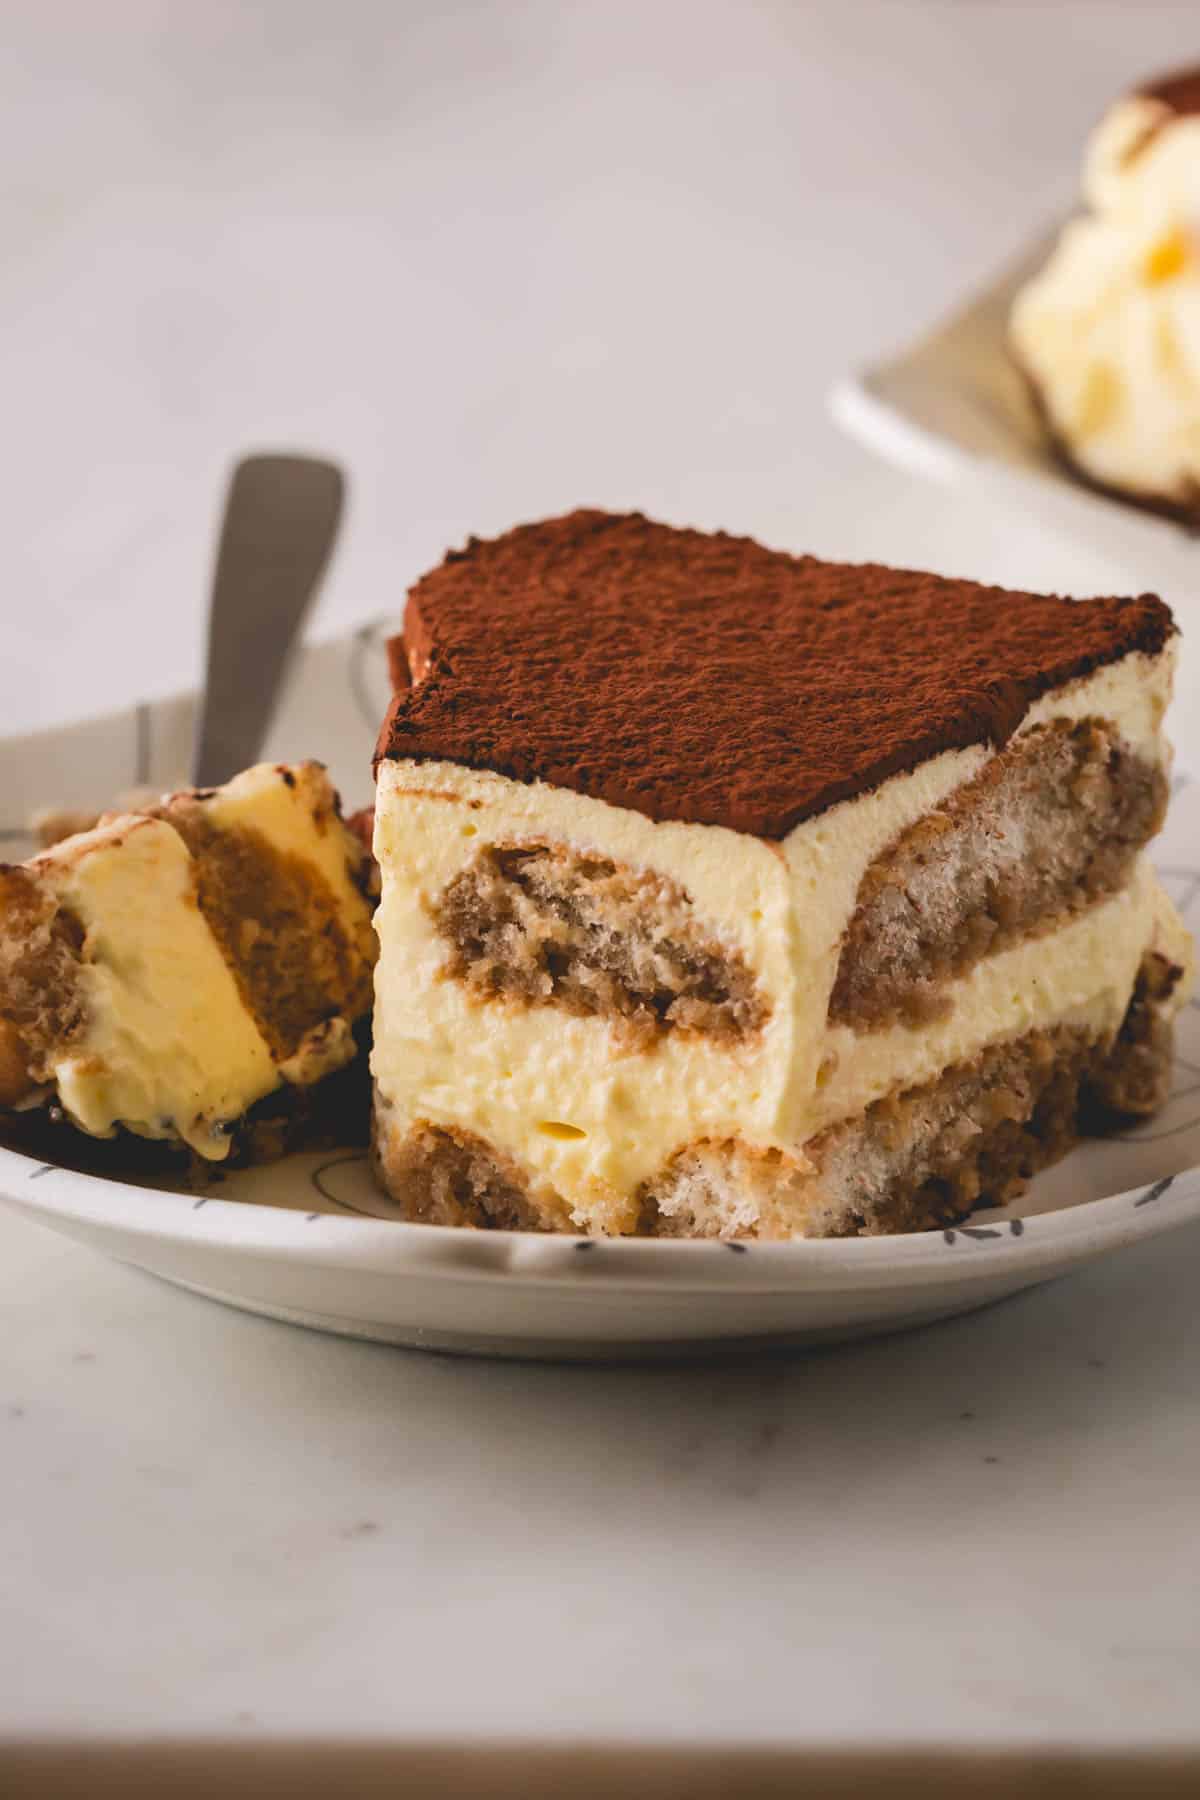 A square of classic tiramisu on a plate with a fork holding the corner bite.